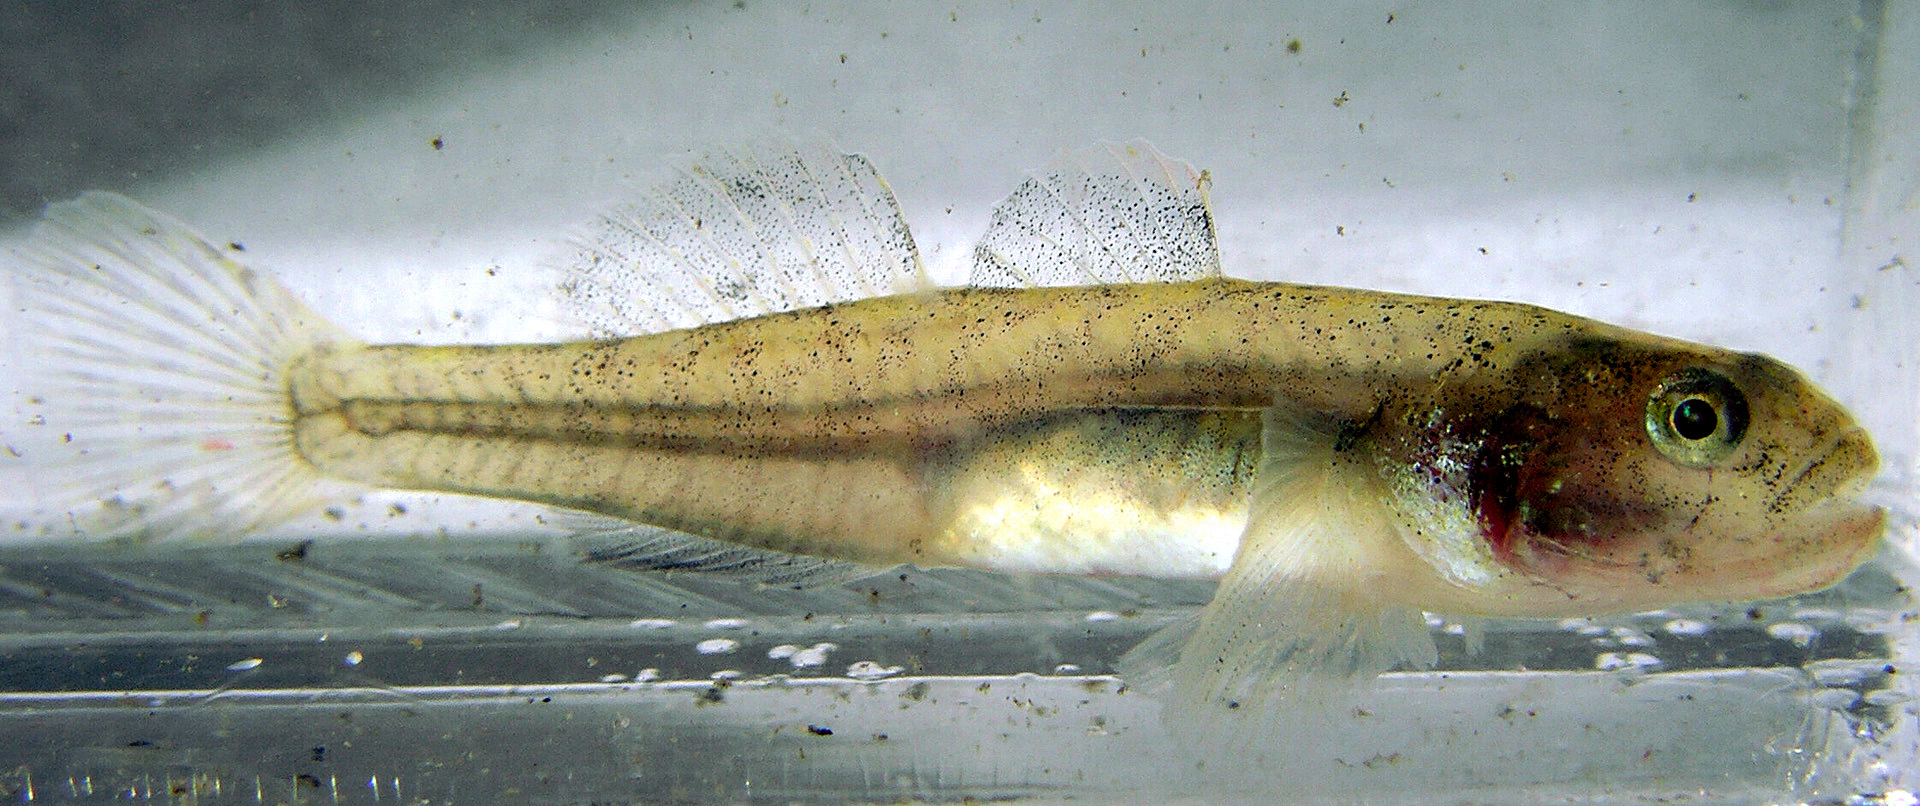 Northern Tidewater Goby Wikipedia